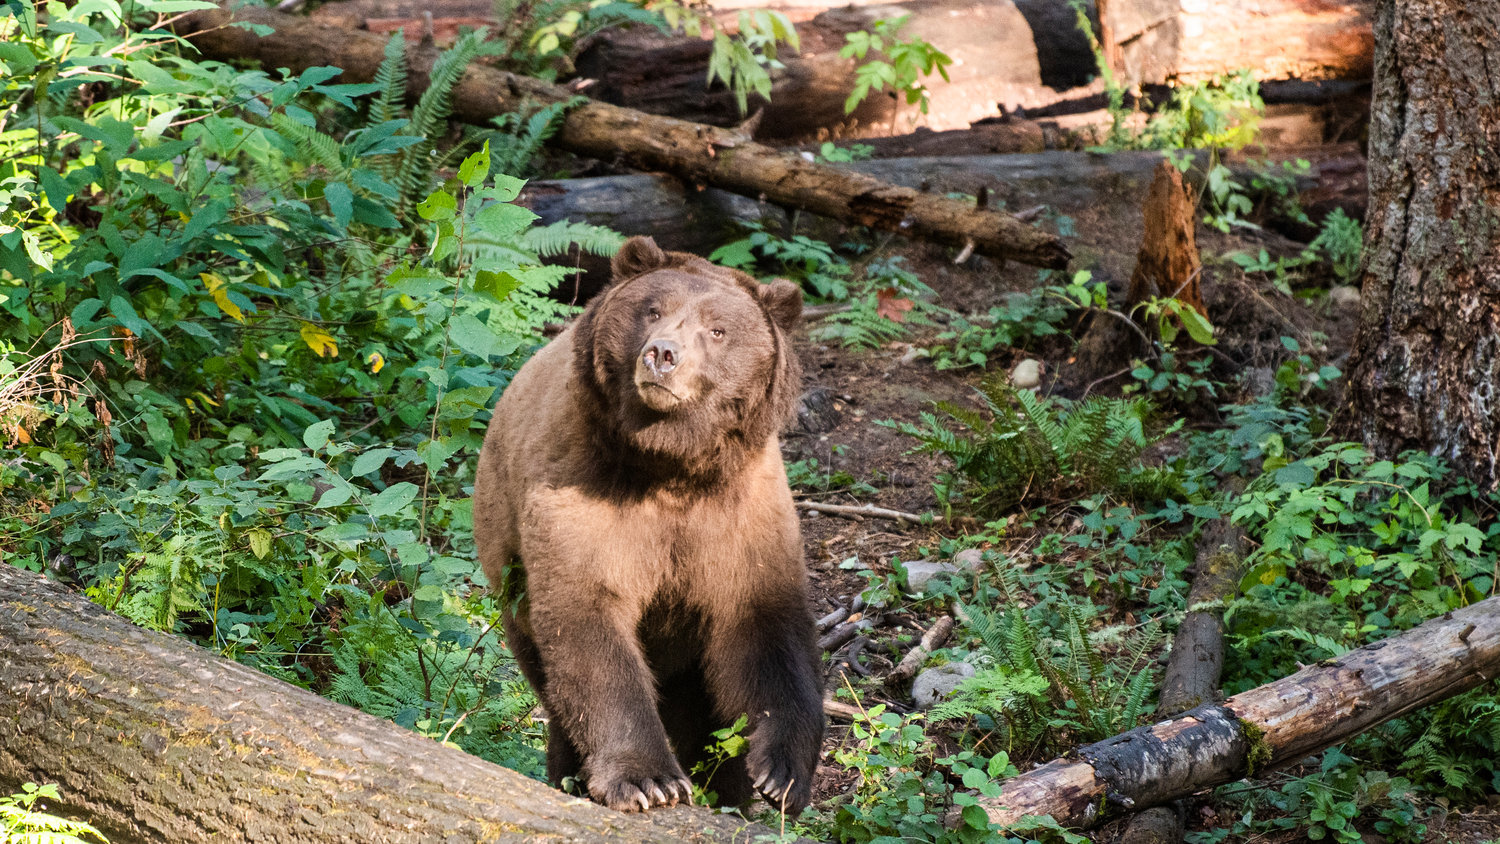 A grizzly bear steps into the sun at Northwest Trek in rural Pierce County. The National Park Service and U.S. Fish and Wildlife are currently looking at options to restore and manage grizzly bears in the wild in the North Cascades of Washington.